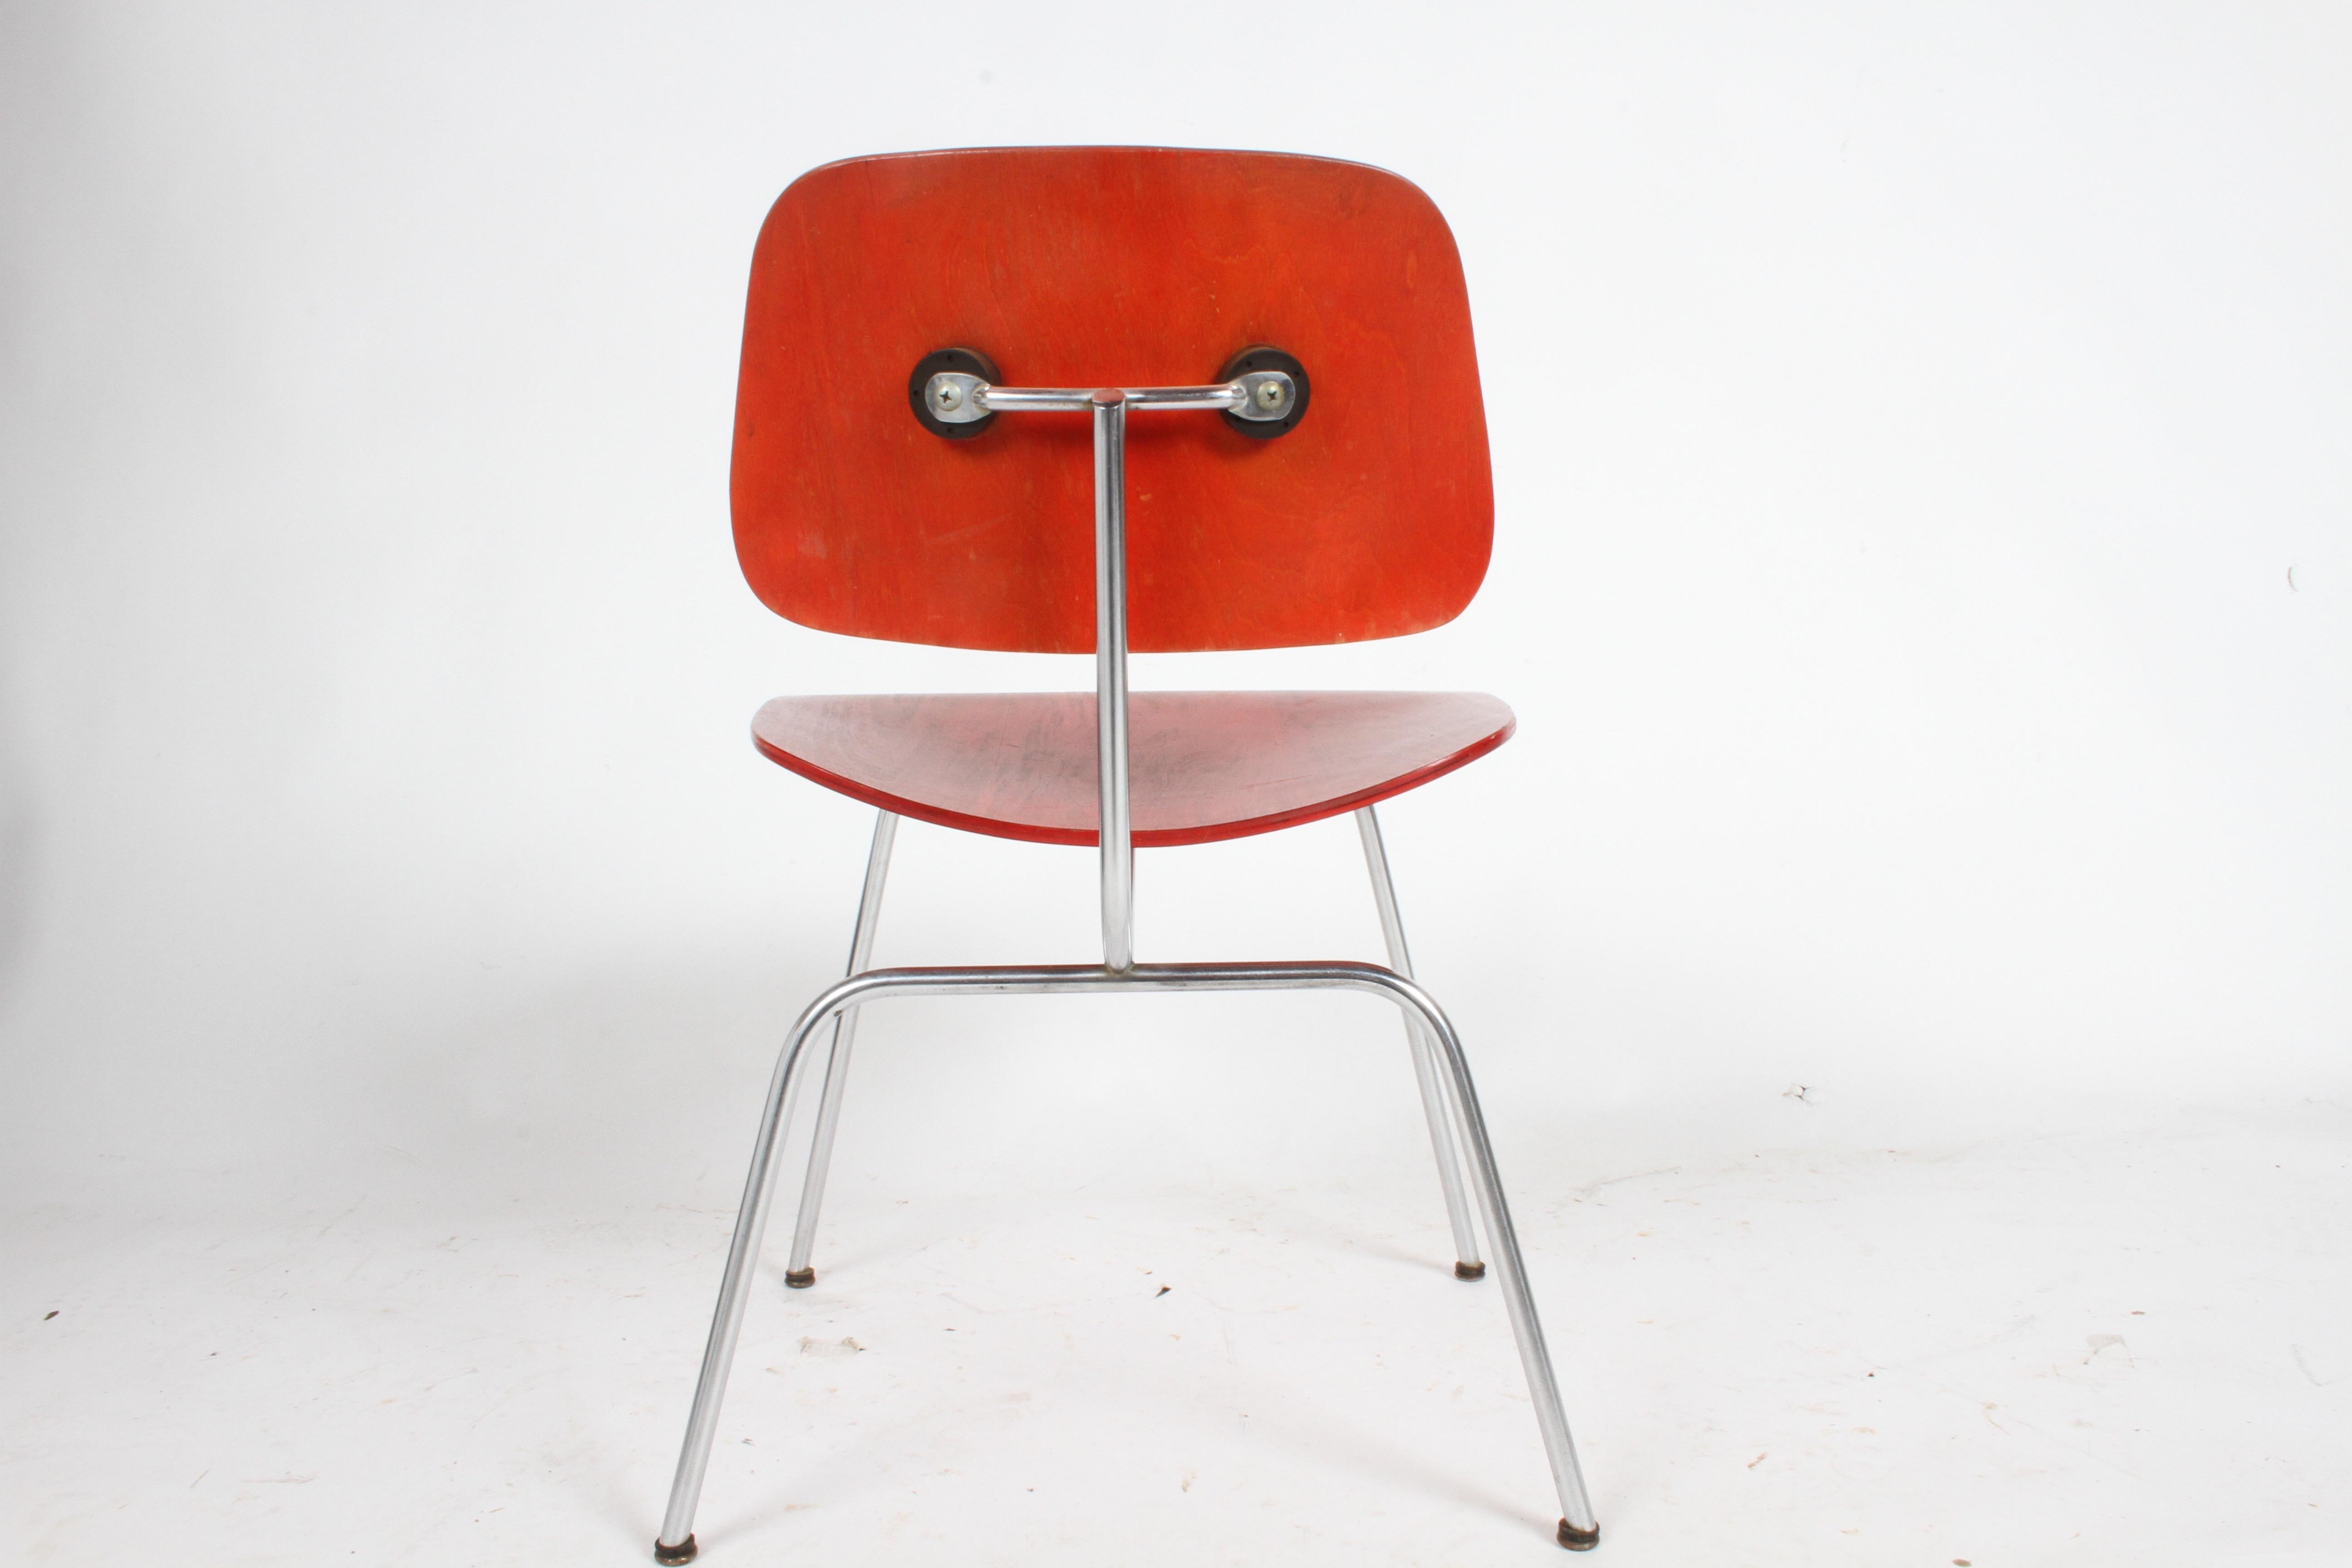 Dyed Early Charles Eames for Herman Miller Red Aniline DCM For Sale